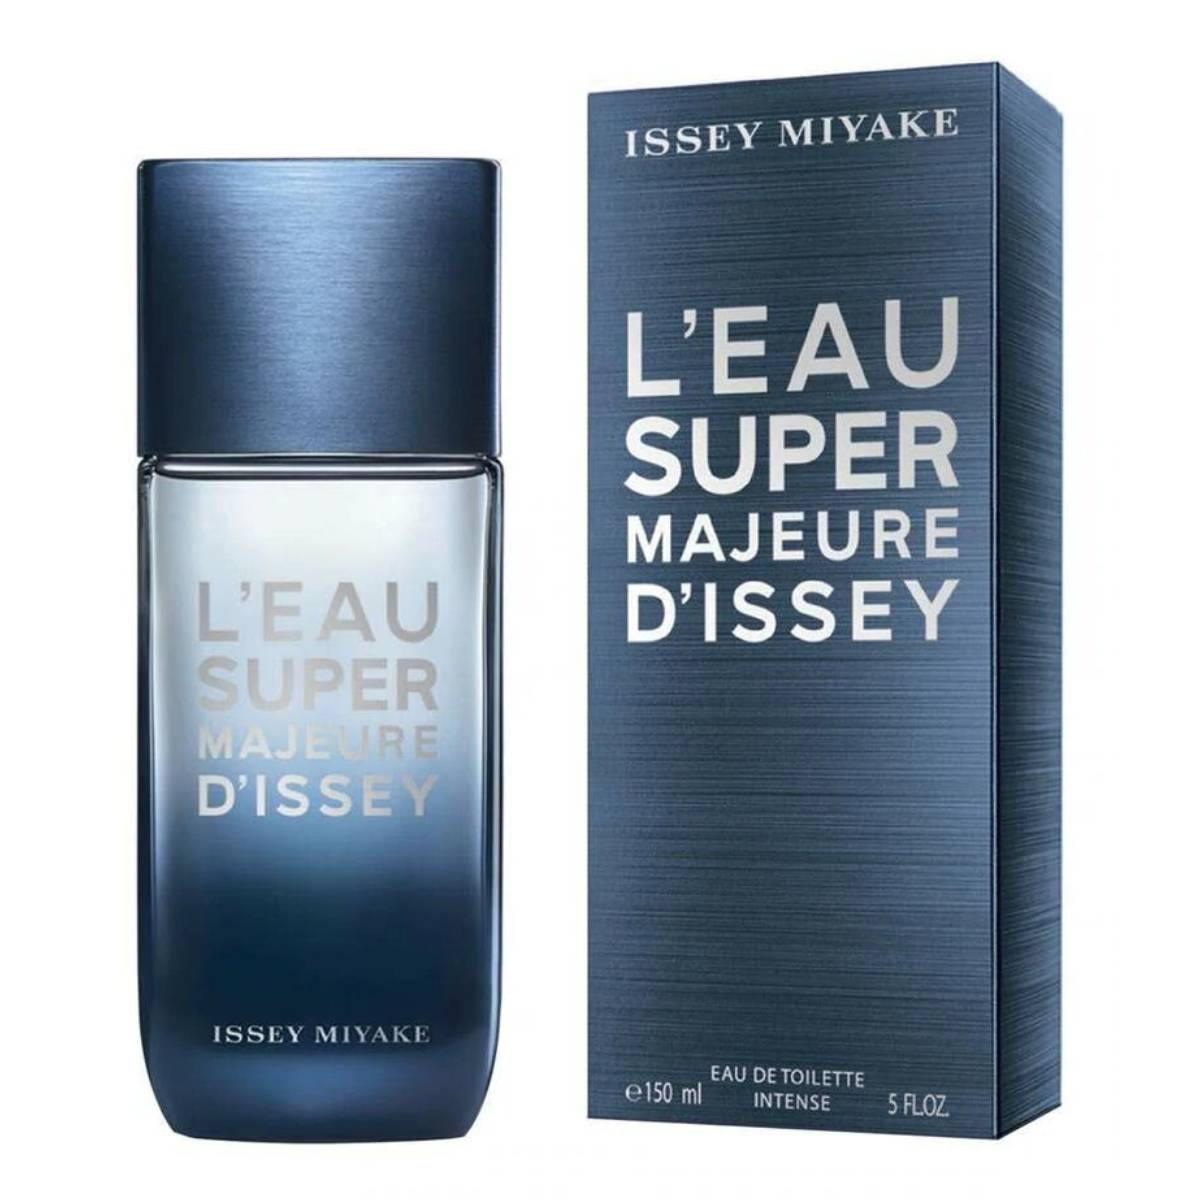 Issey Miyake L'Eau Super Majeure d'Issey Edt 150ml